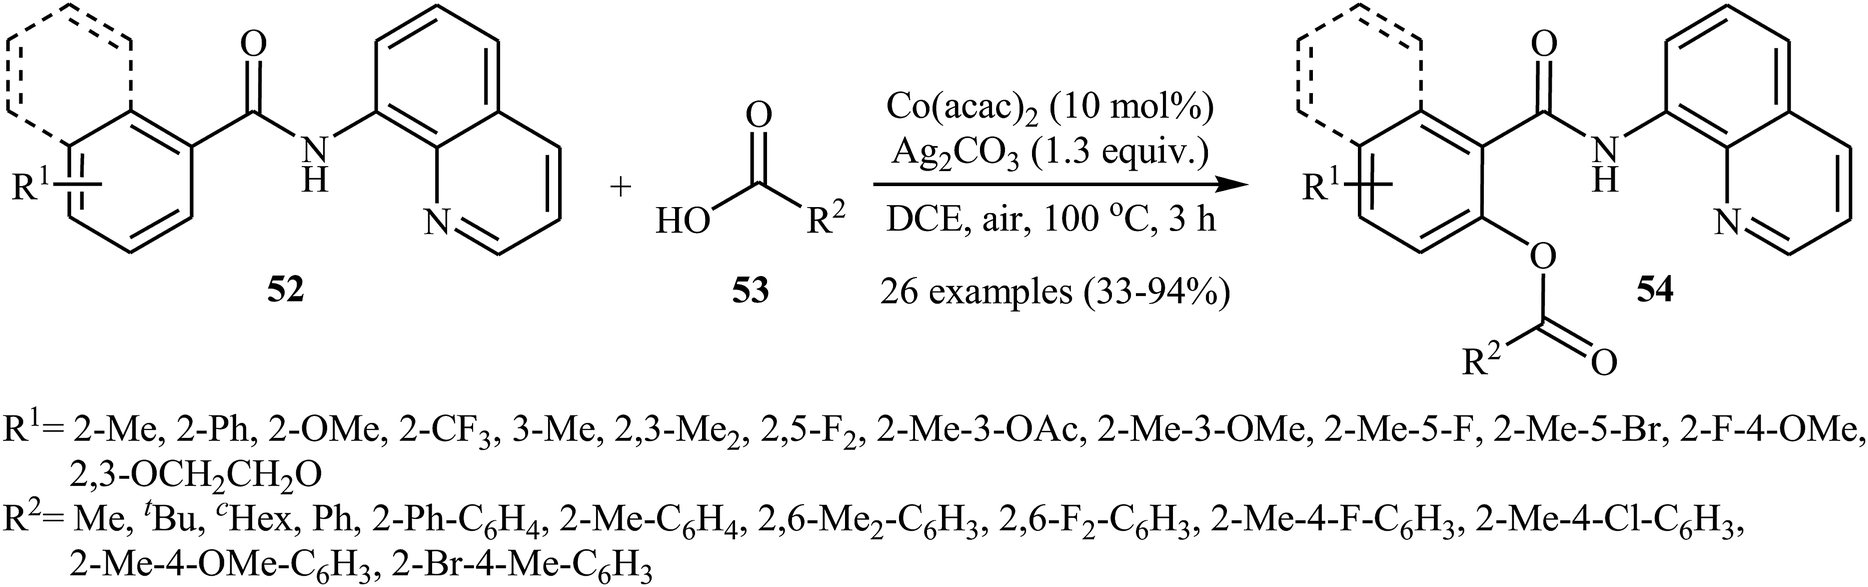 Cross Dehydrogenative Coupling Reactions Between Arenes C H And Carboxylic Acids O H A Straightforward And Environmentally Benign Access To O Ar Rsc Advances Rsc Publishing Doi 10 1039 C9rac